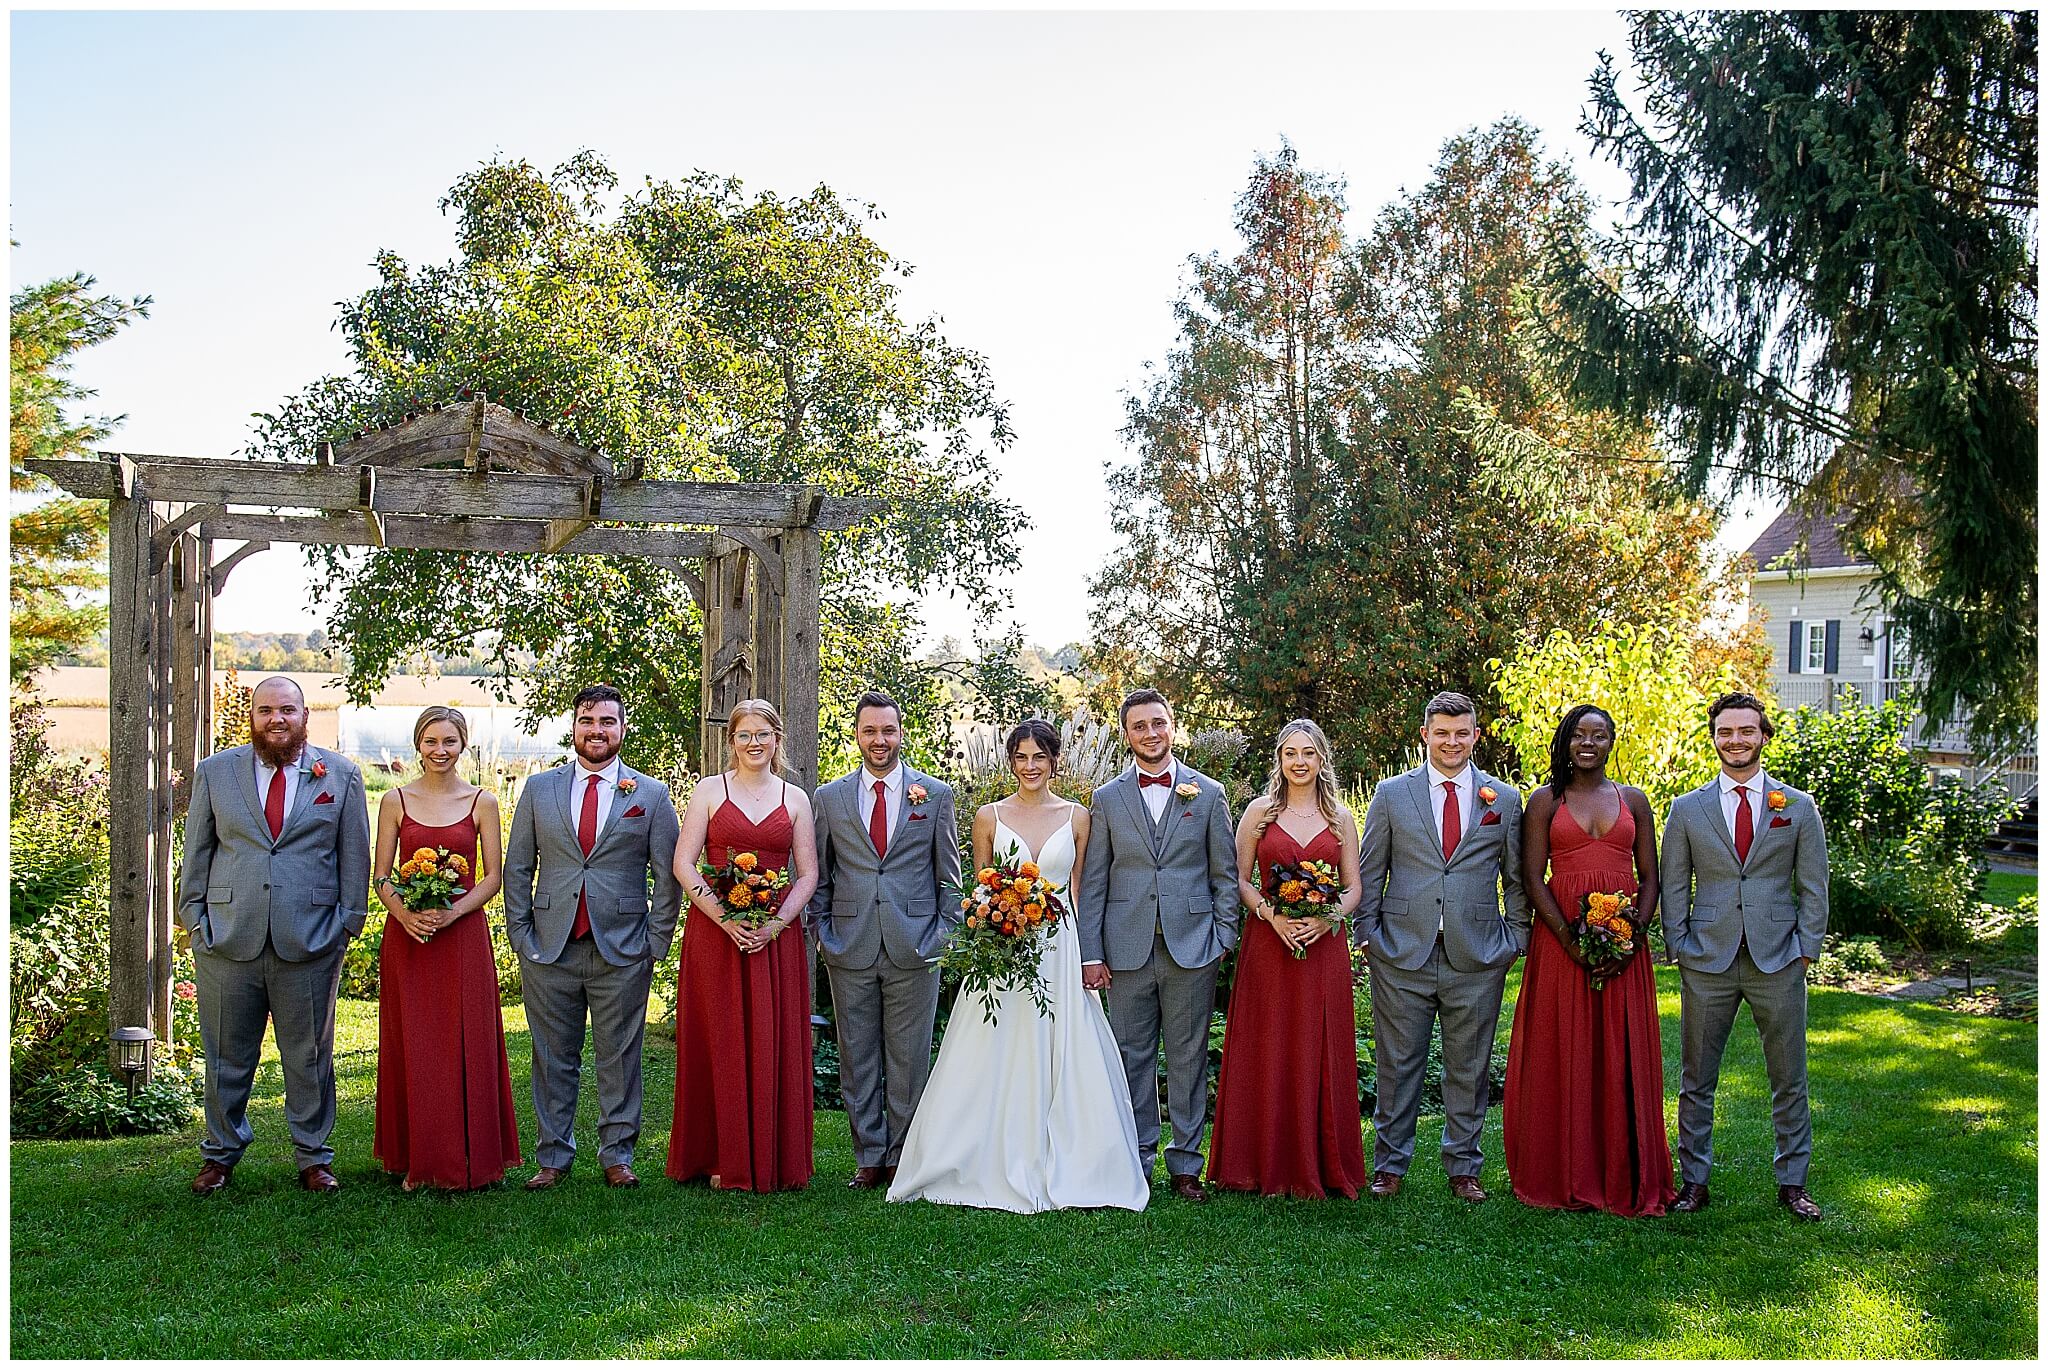 bridesmaids in long cinnamon coloured gowns holding fall bouquets and standing beside groomsmen with grey suits . Taken outdoors in the gardens of Strathmere Wedding venue near Ottawa